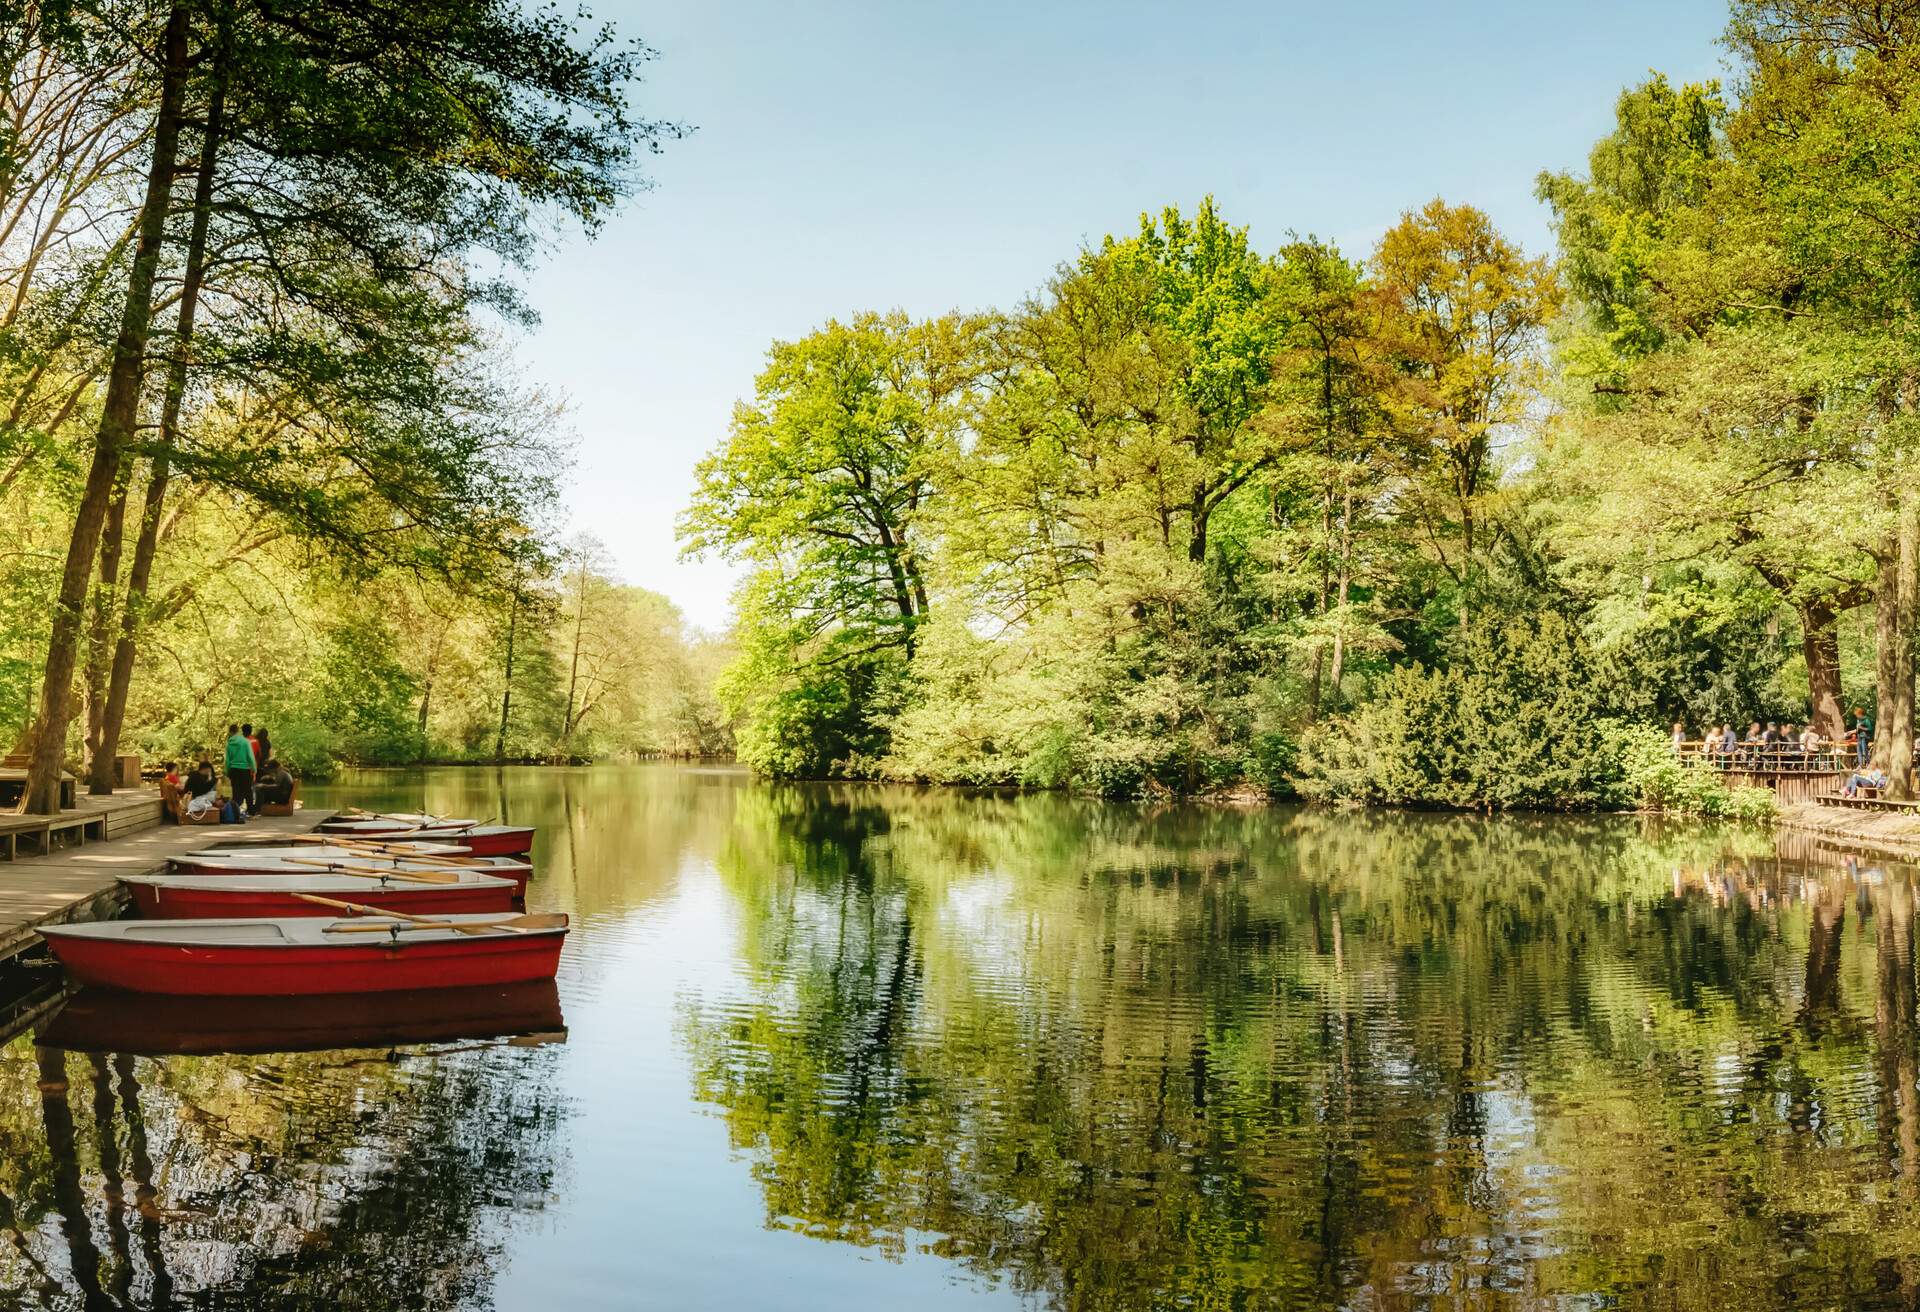 Red row boats moored in the wooden footpath by the lake surrounded by lush green trees.